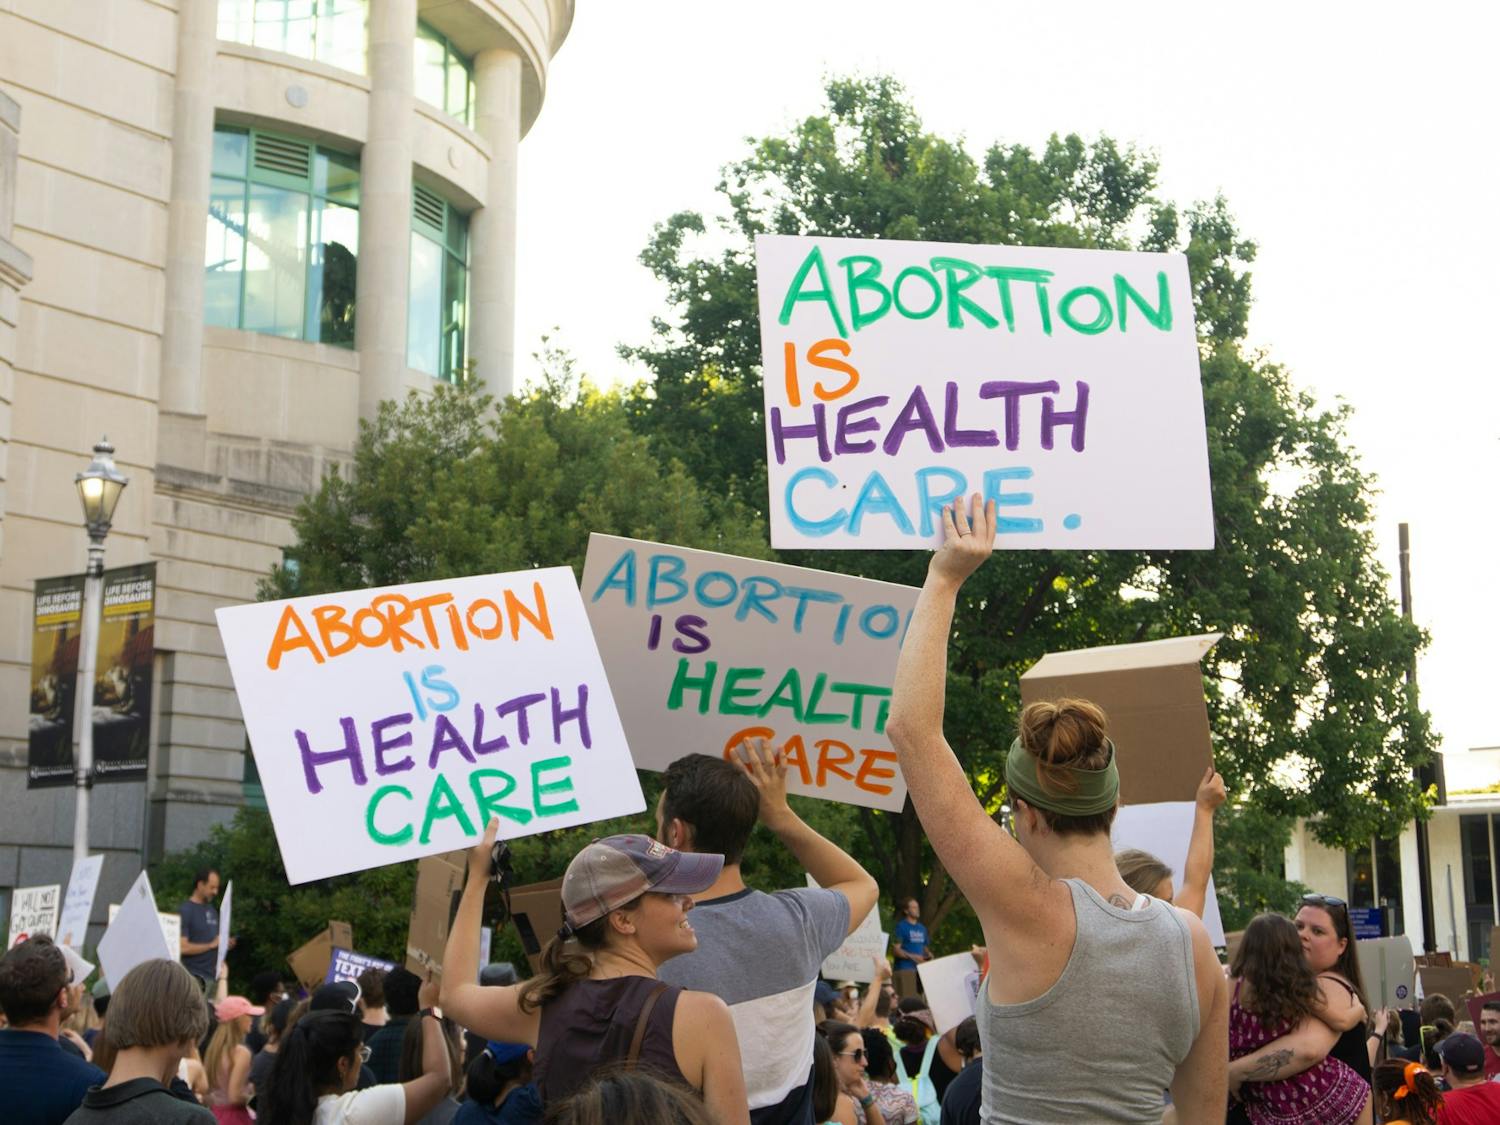 Supporters of abortion rights gather in Raleigh to protest the U.S. Supreme Court's decision to overturn Roe v. Wade on June 24, 2022.